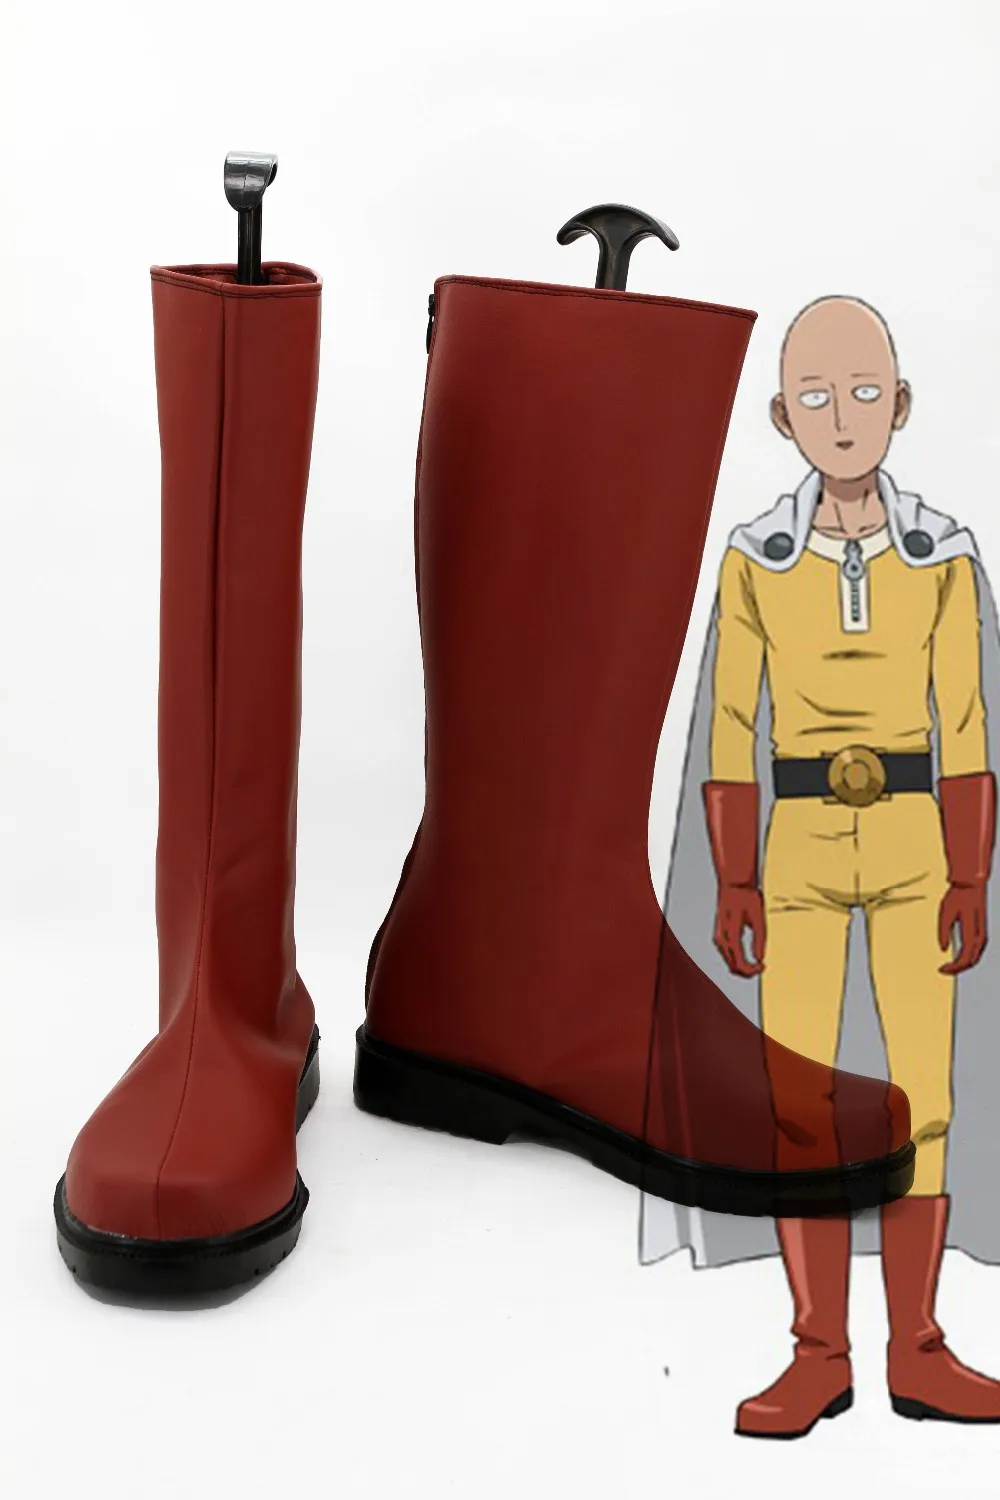 

Anime One Punch Man Saitama Caped Baldy Hagemanto Cosplay Shoes Boots Men Boy Red Cosplay Halloween Shoes Costume Accessories